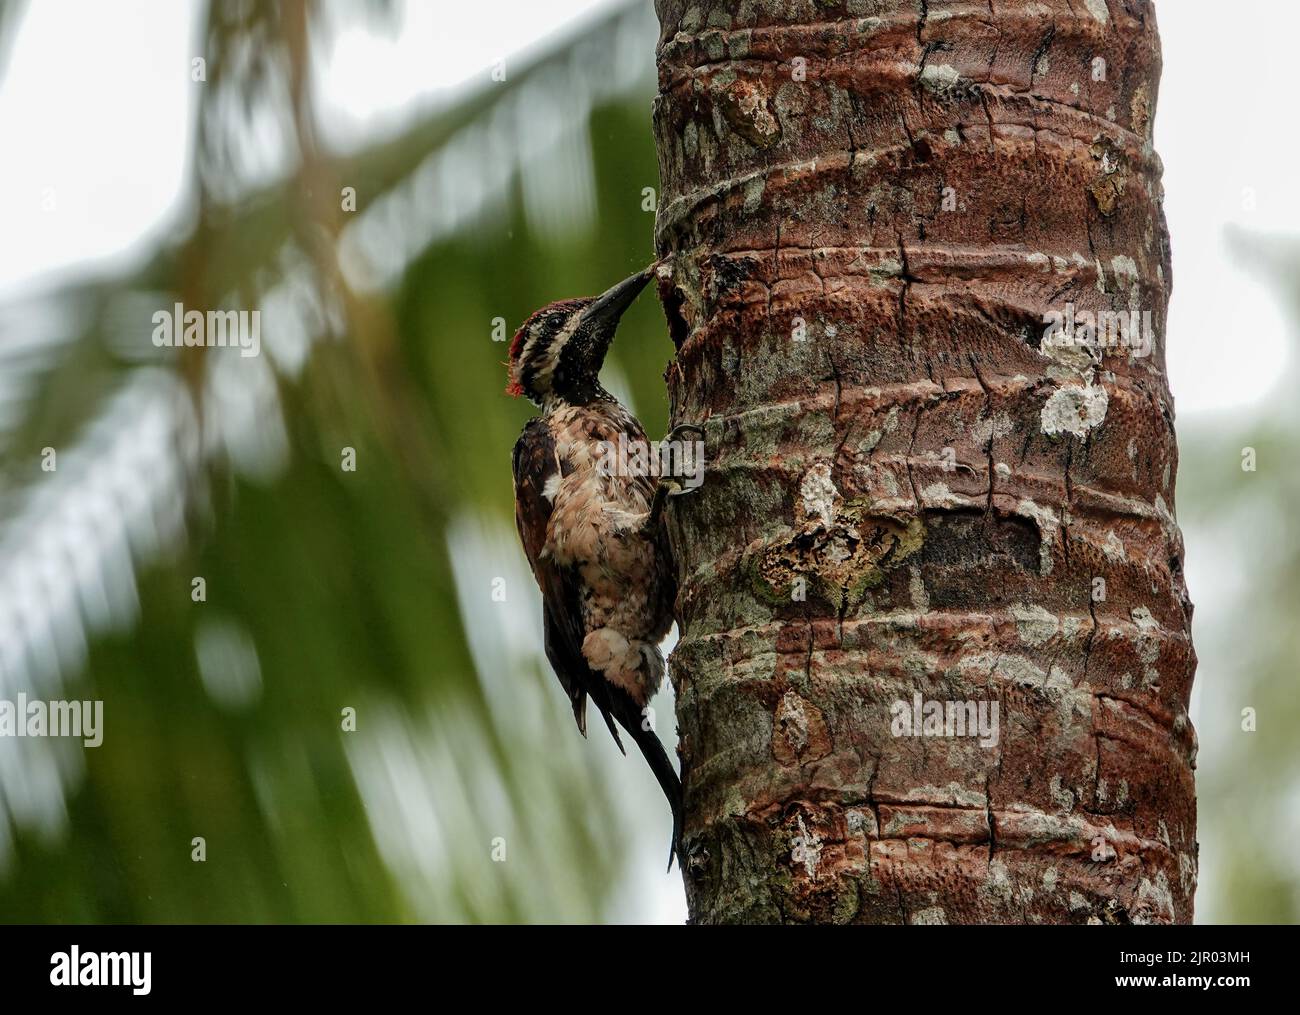 A beautiful Black-rumped flameback woodpecker is sitting on coconut tree during the nesting season in a green blurred forest background. Stock Photo